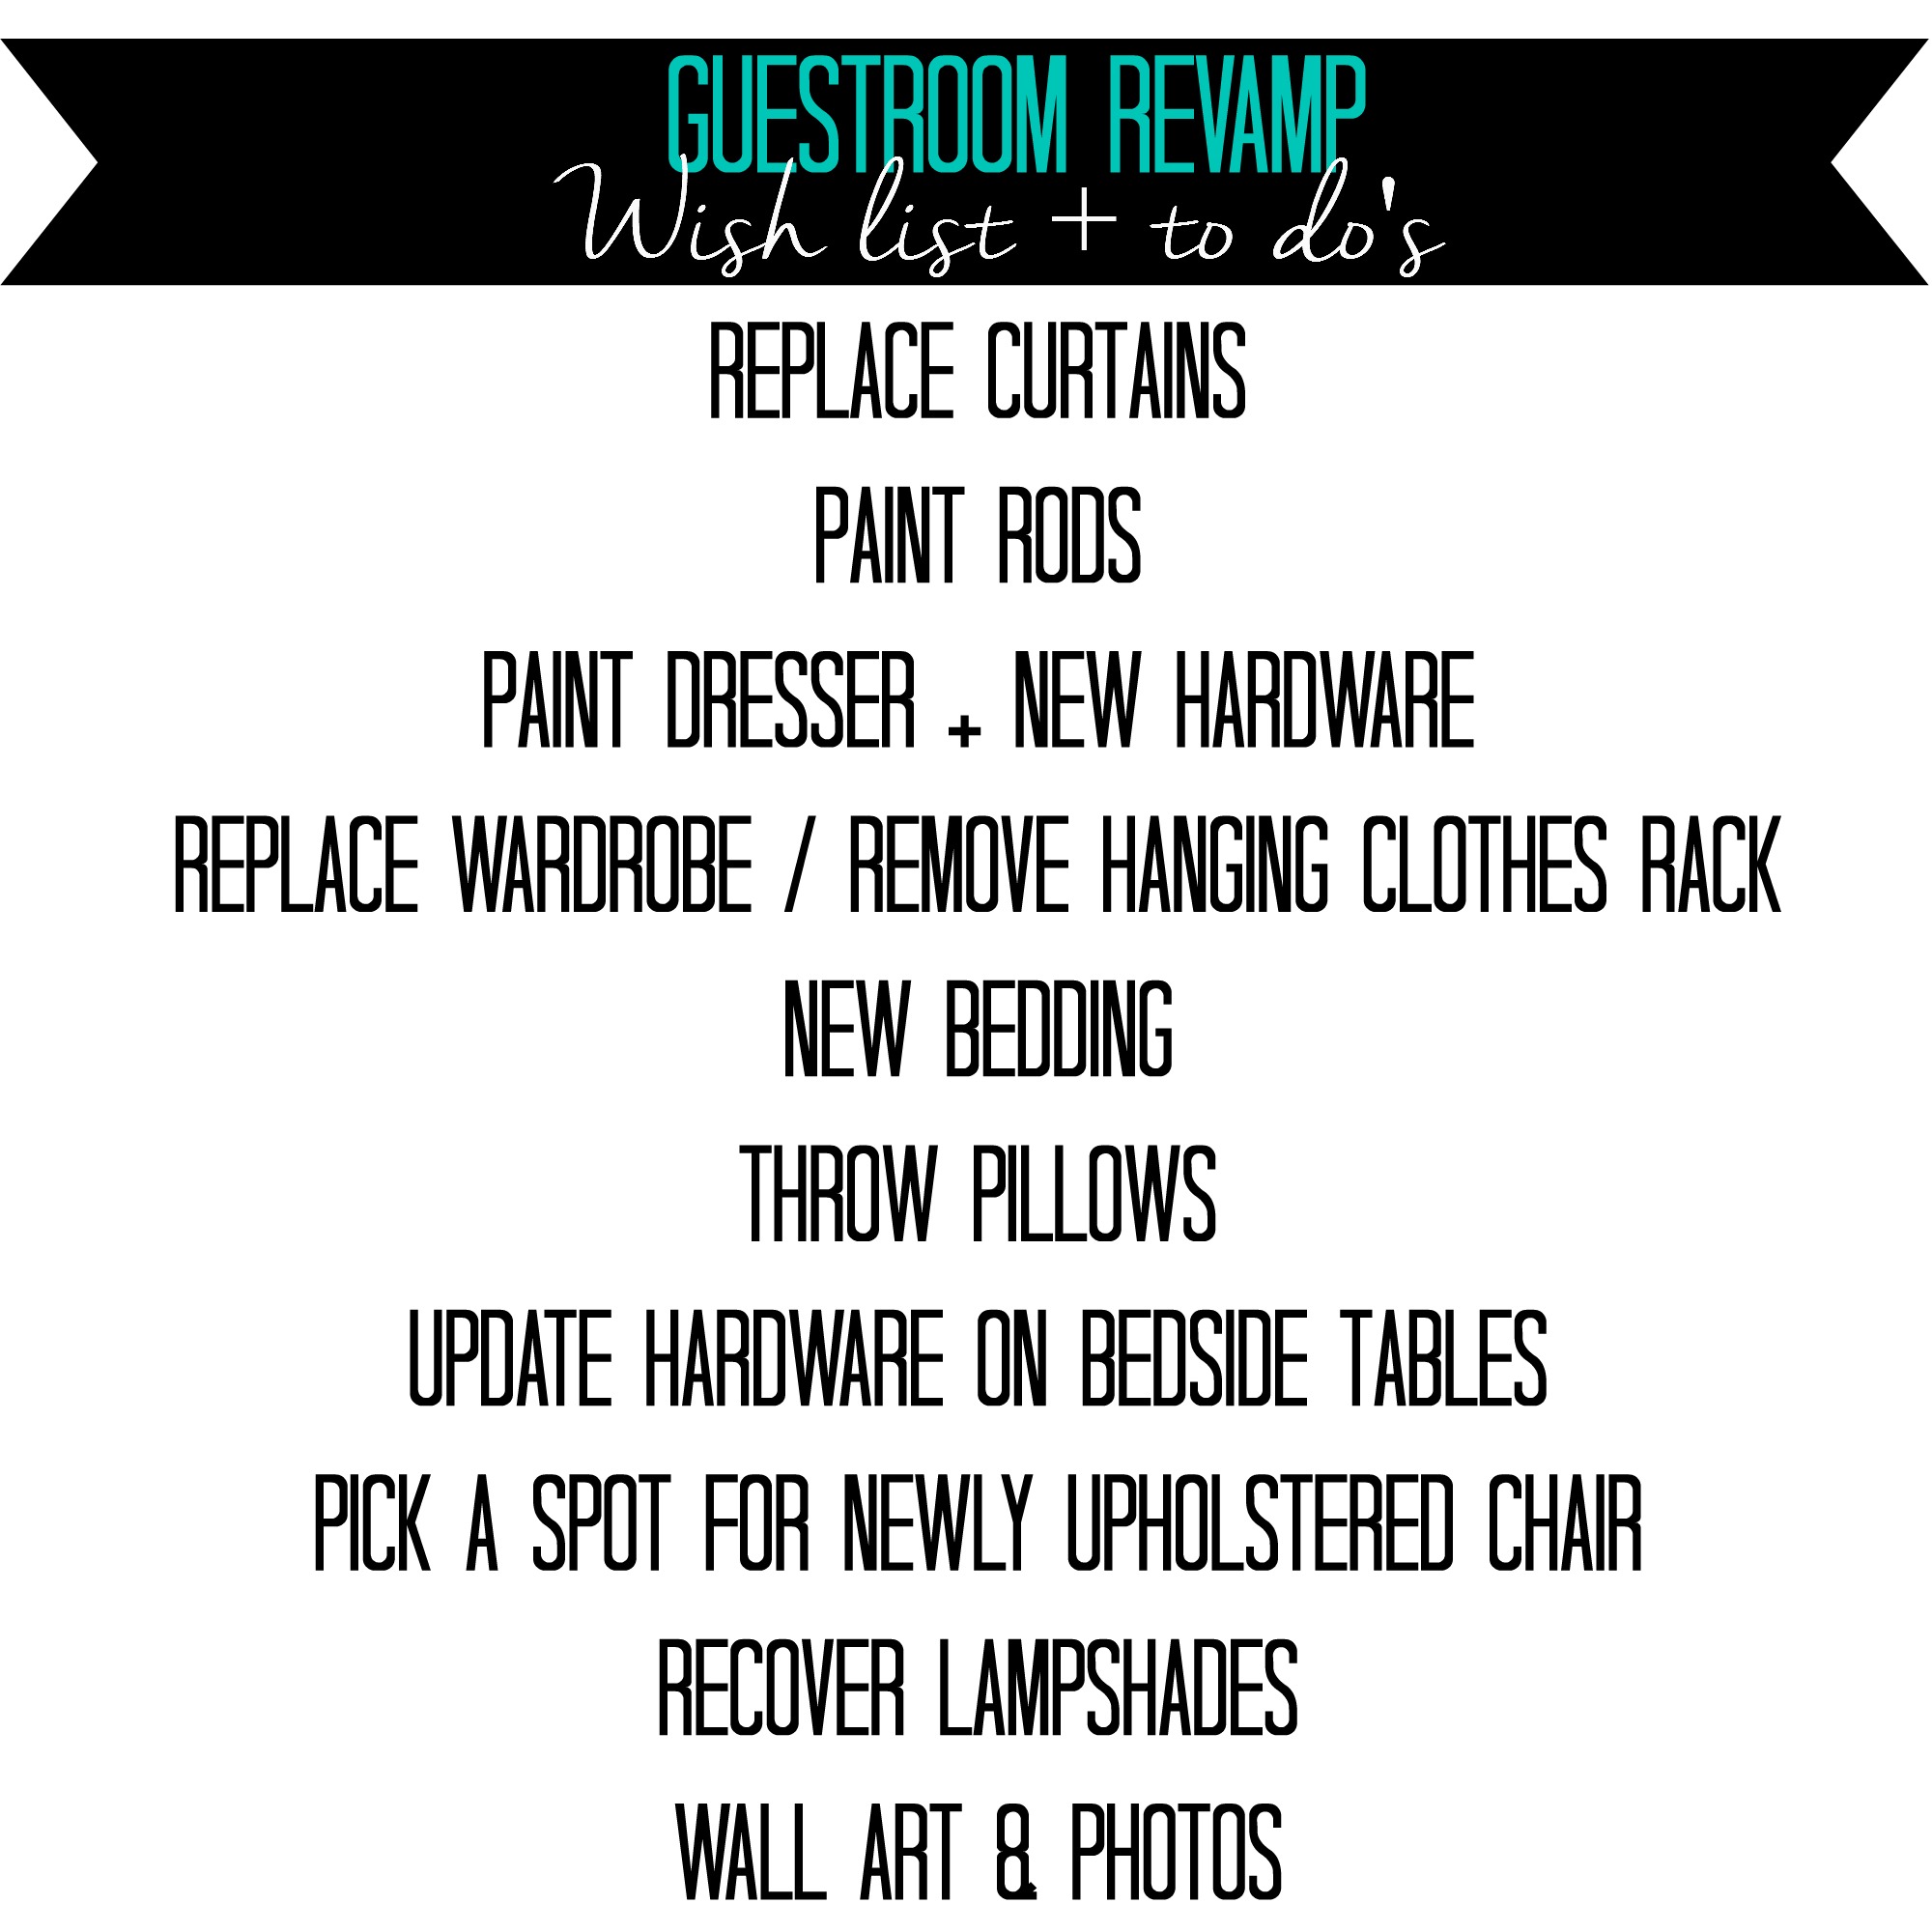 Guestroom Revamp checklist - This is our Bliss